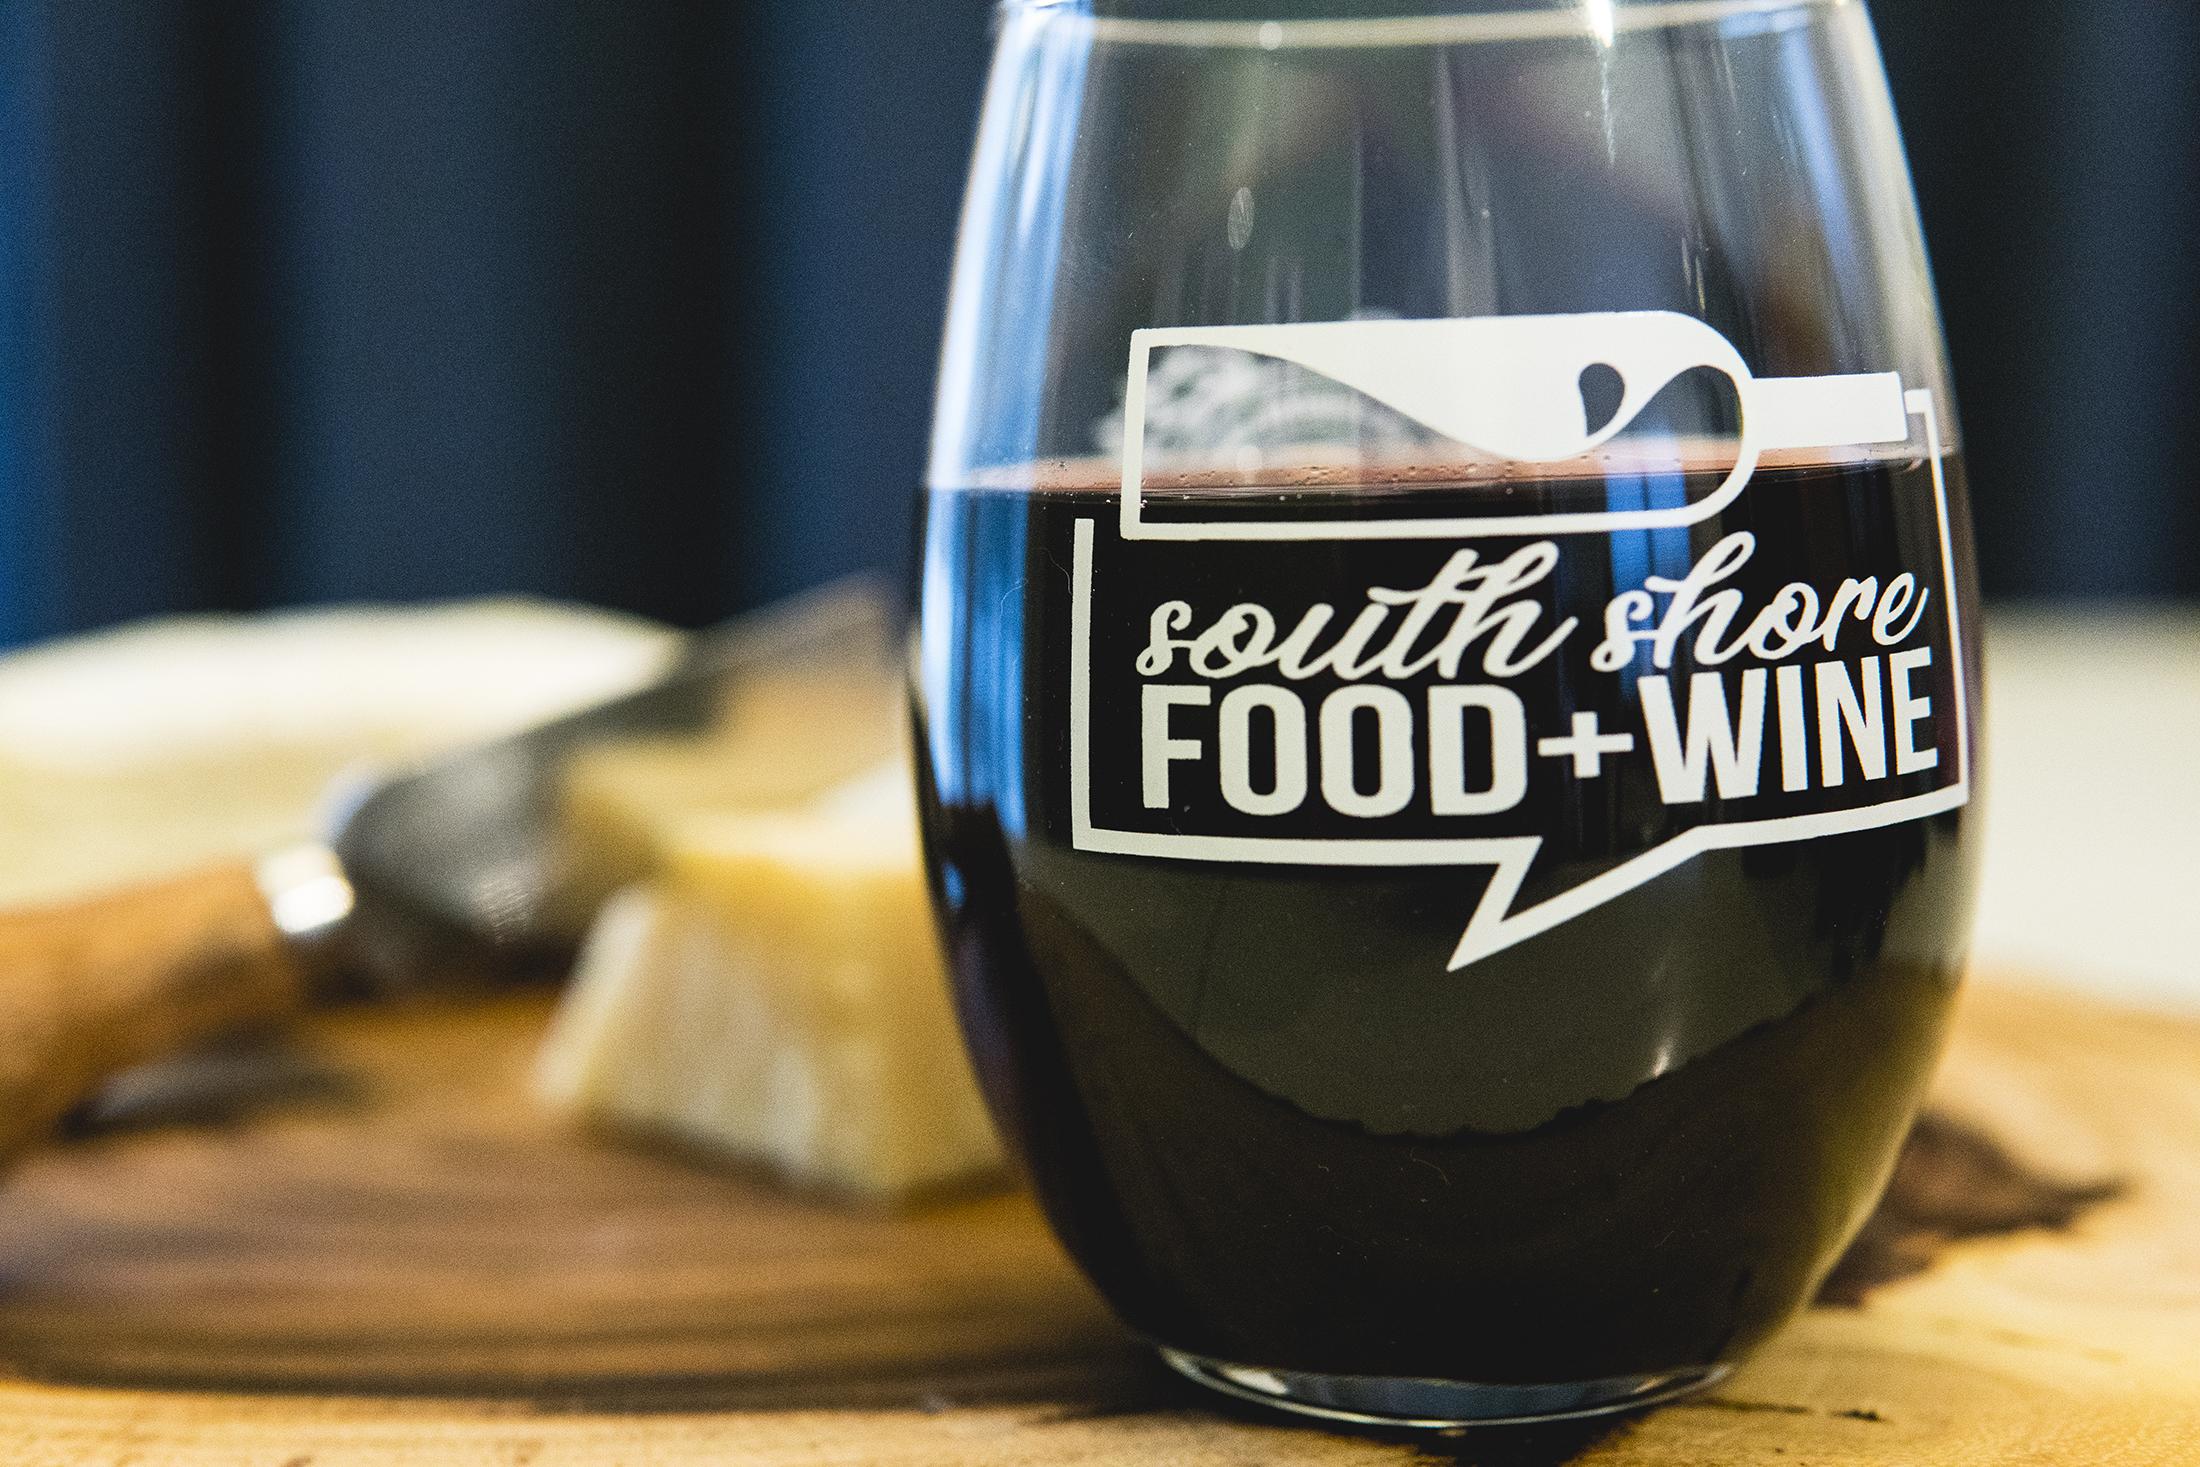 2020 South Shore Food & Wine Expo